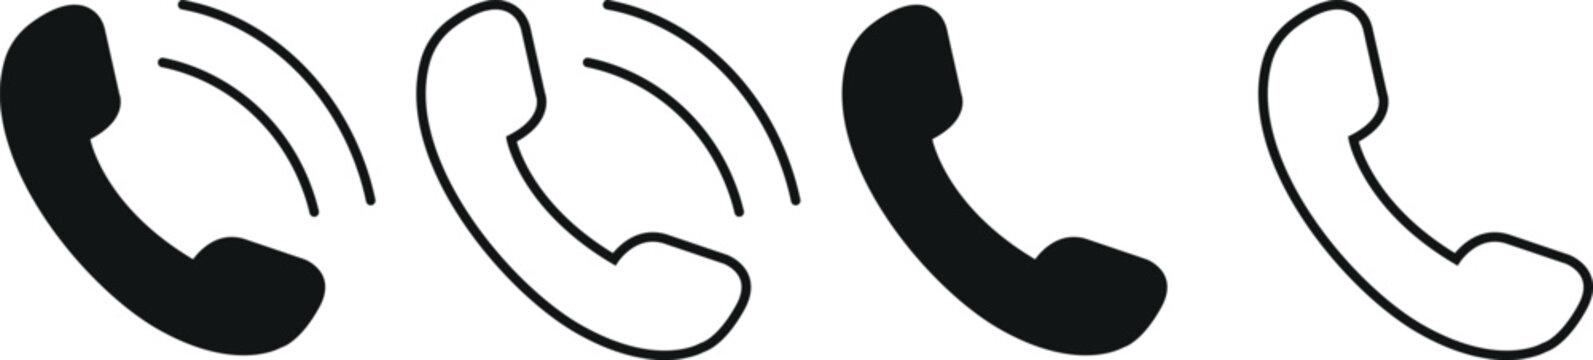 Contact us.Telephone, communication. icon in flat style. Vector illustration. Phone icon set.